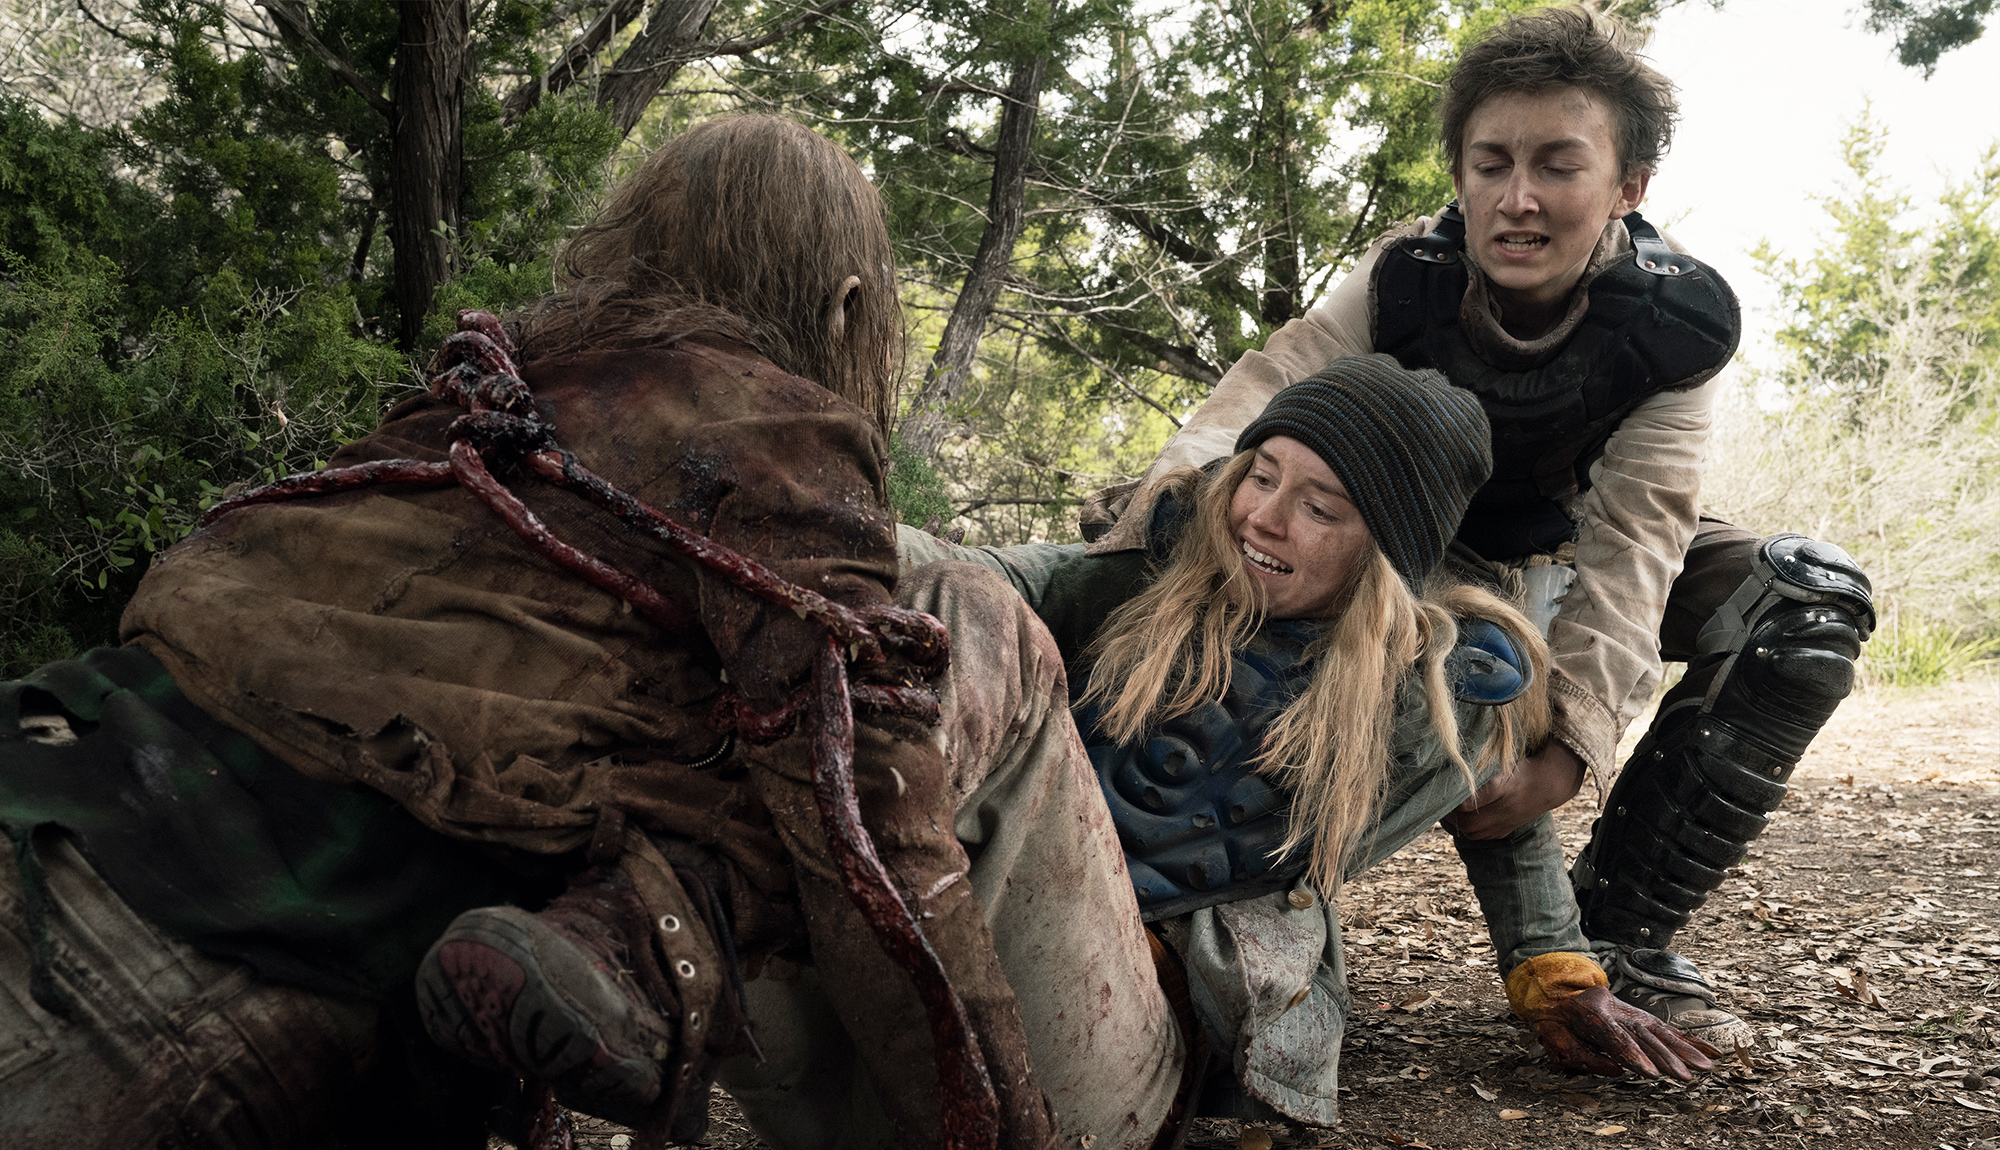 The Best Images From Fear the Walking Dead Episode 504